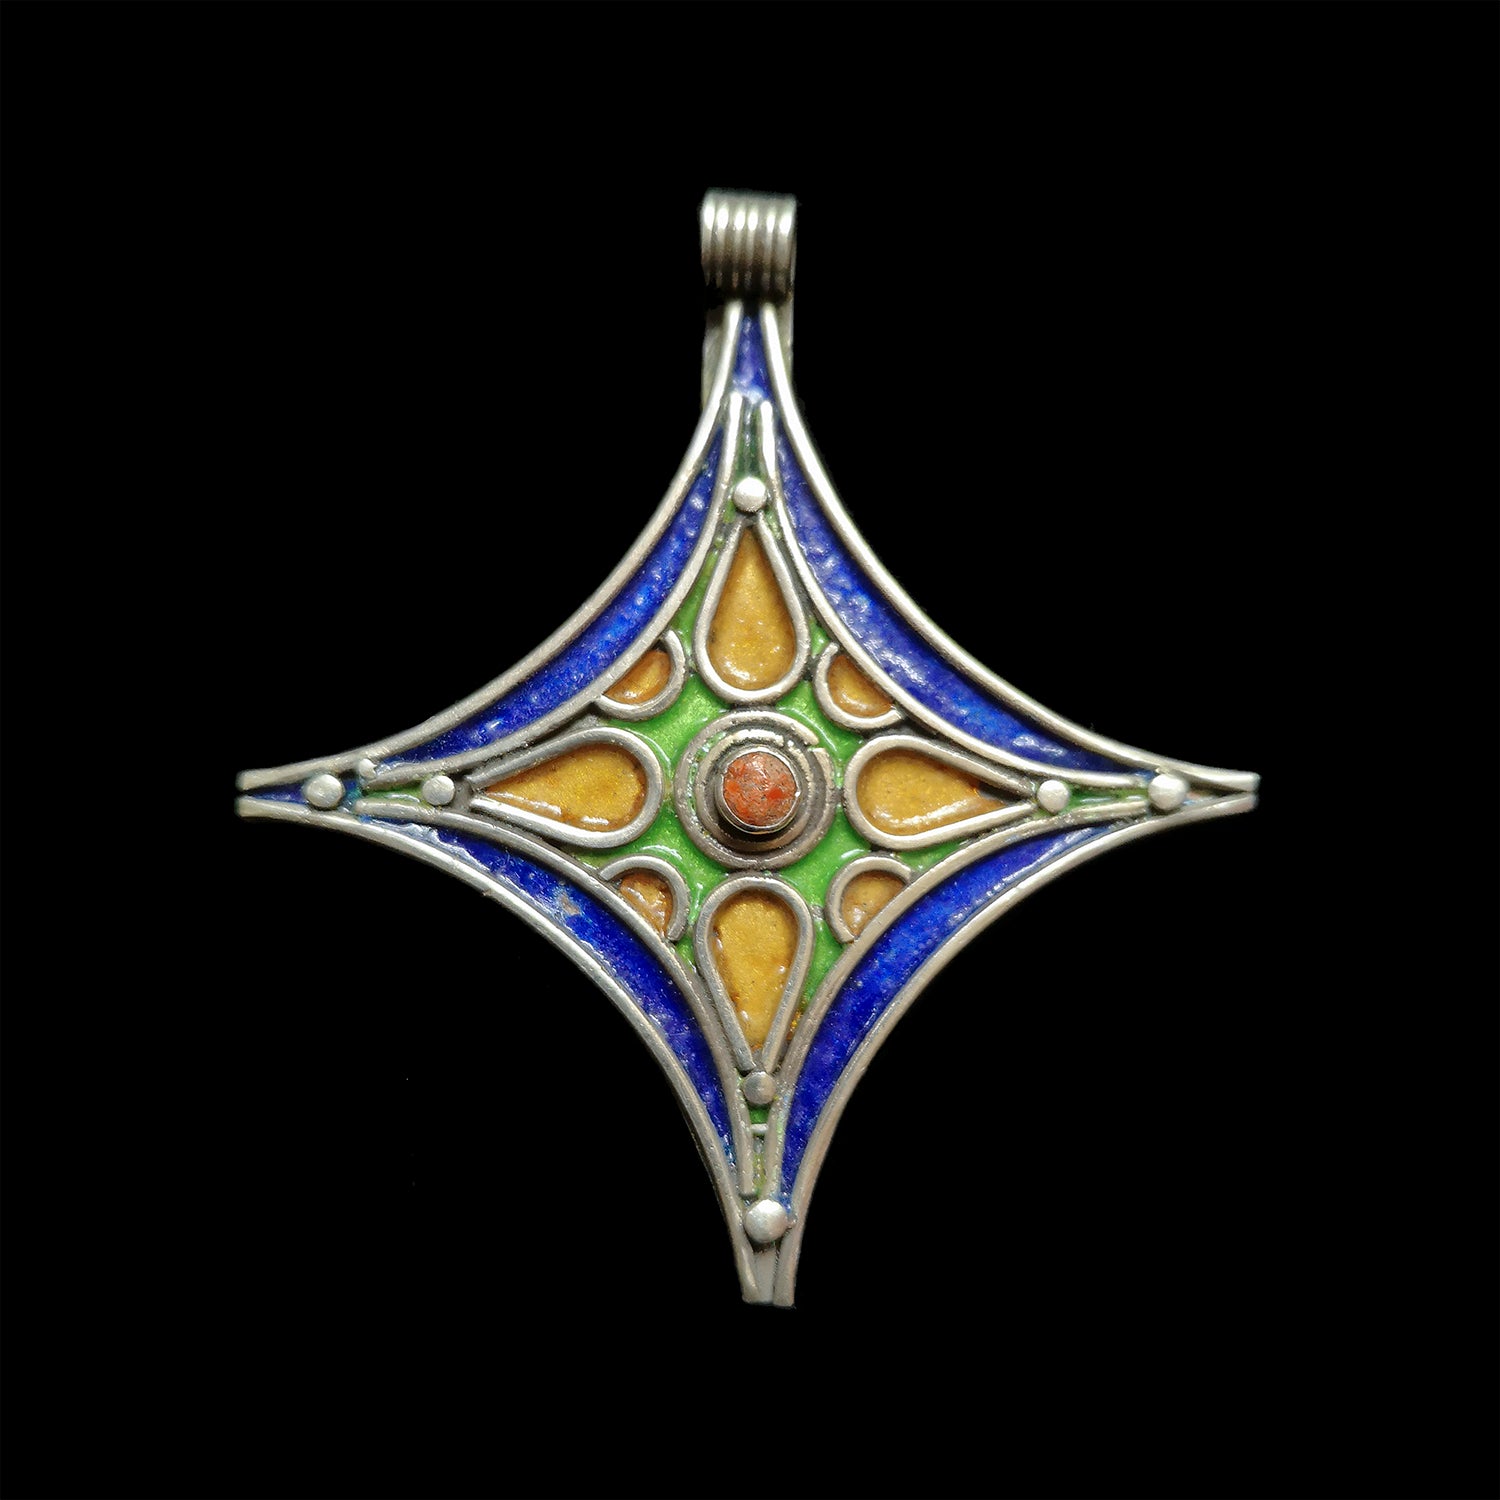 Silver and enamel cross from Tiznit, Morocco